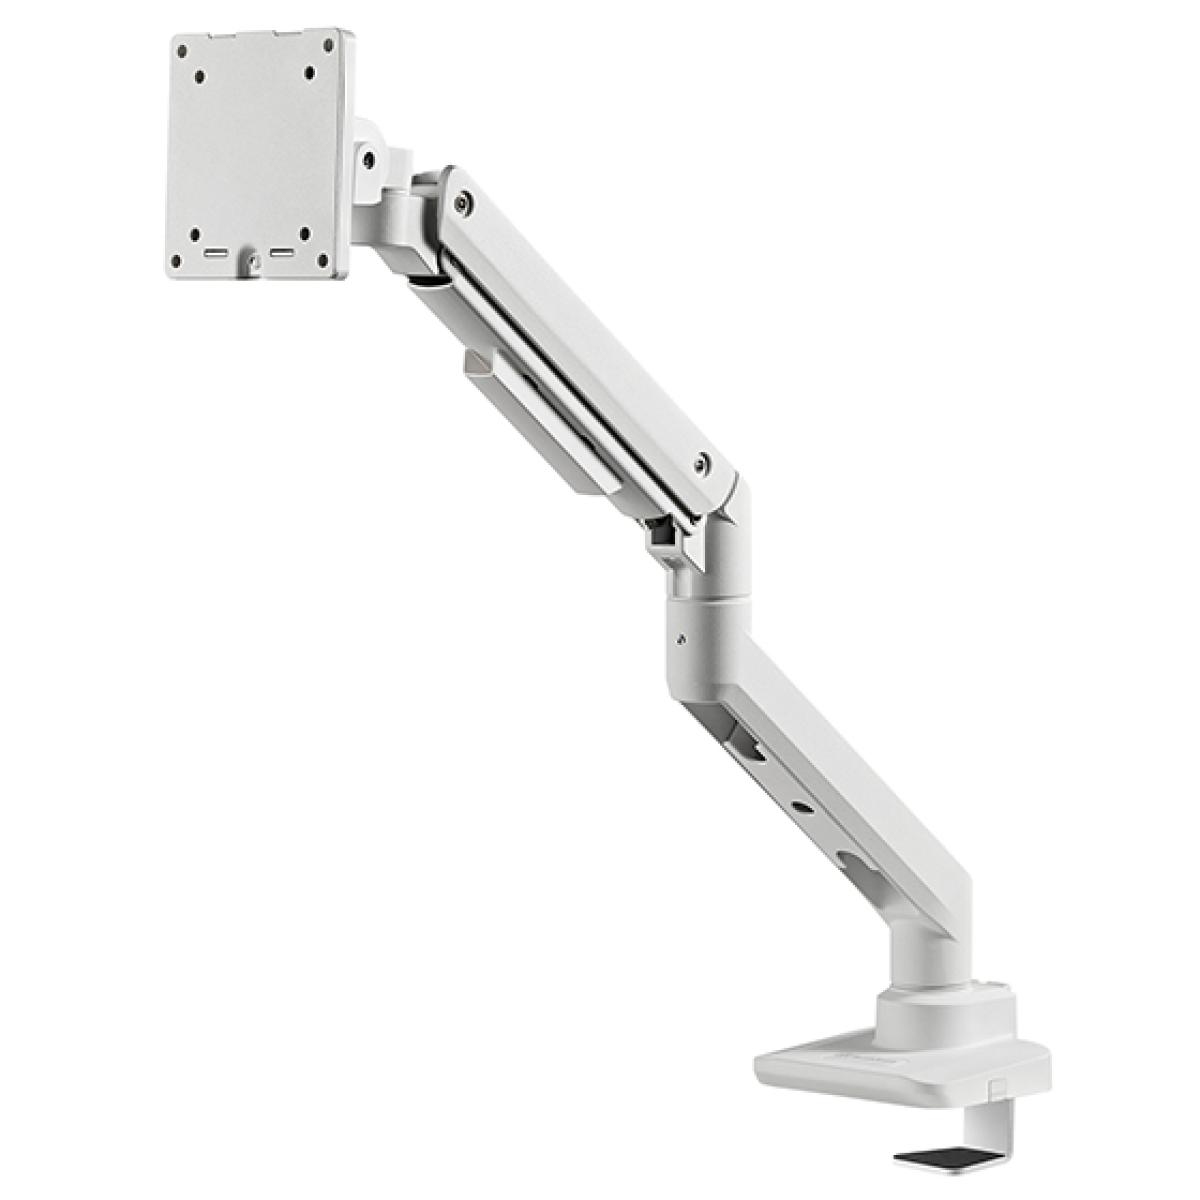 SilverStone ARM14 (White) Single Monitor Arm w/ Heavy-Duty Gas Spring Design & Versatile Adjustability, For Monitors Up To 49